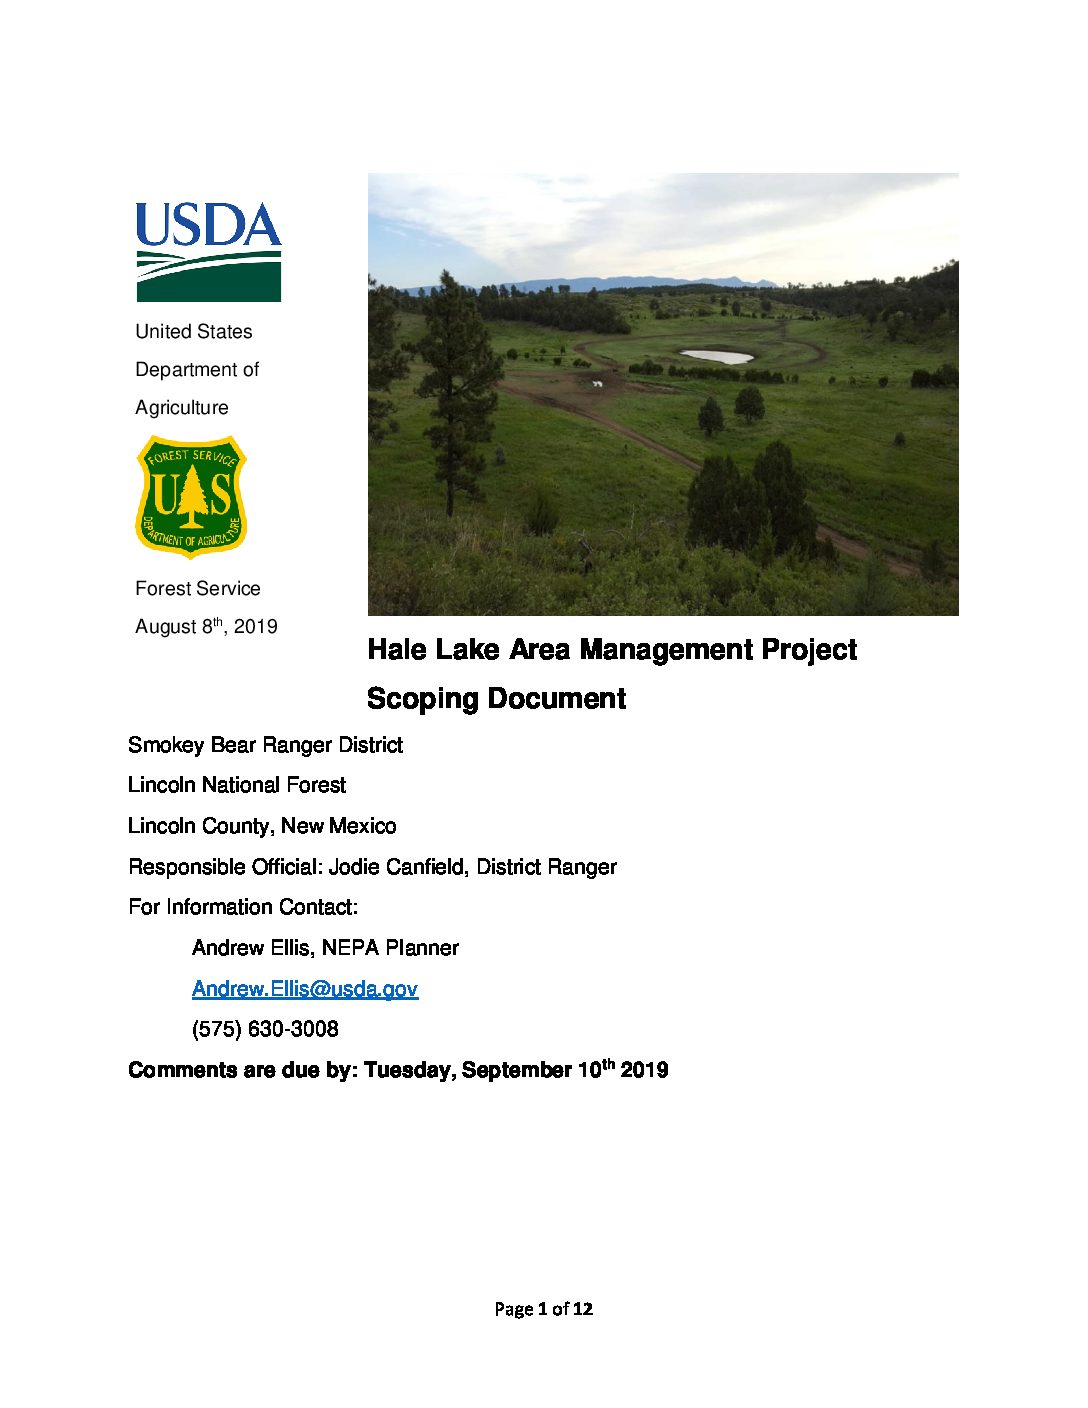 Hale Lake Area Management Project - Scoping Document